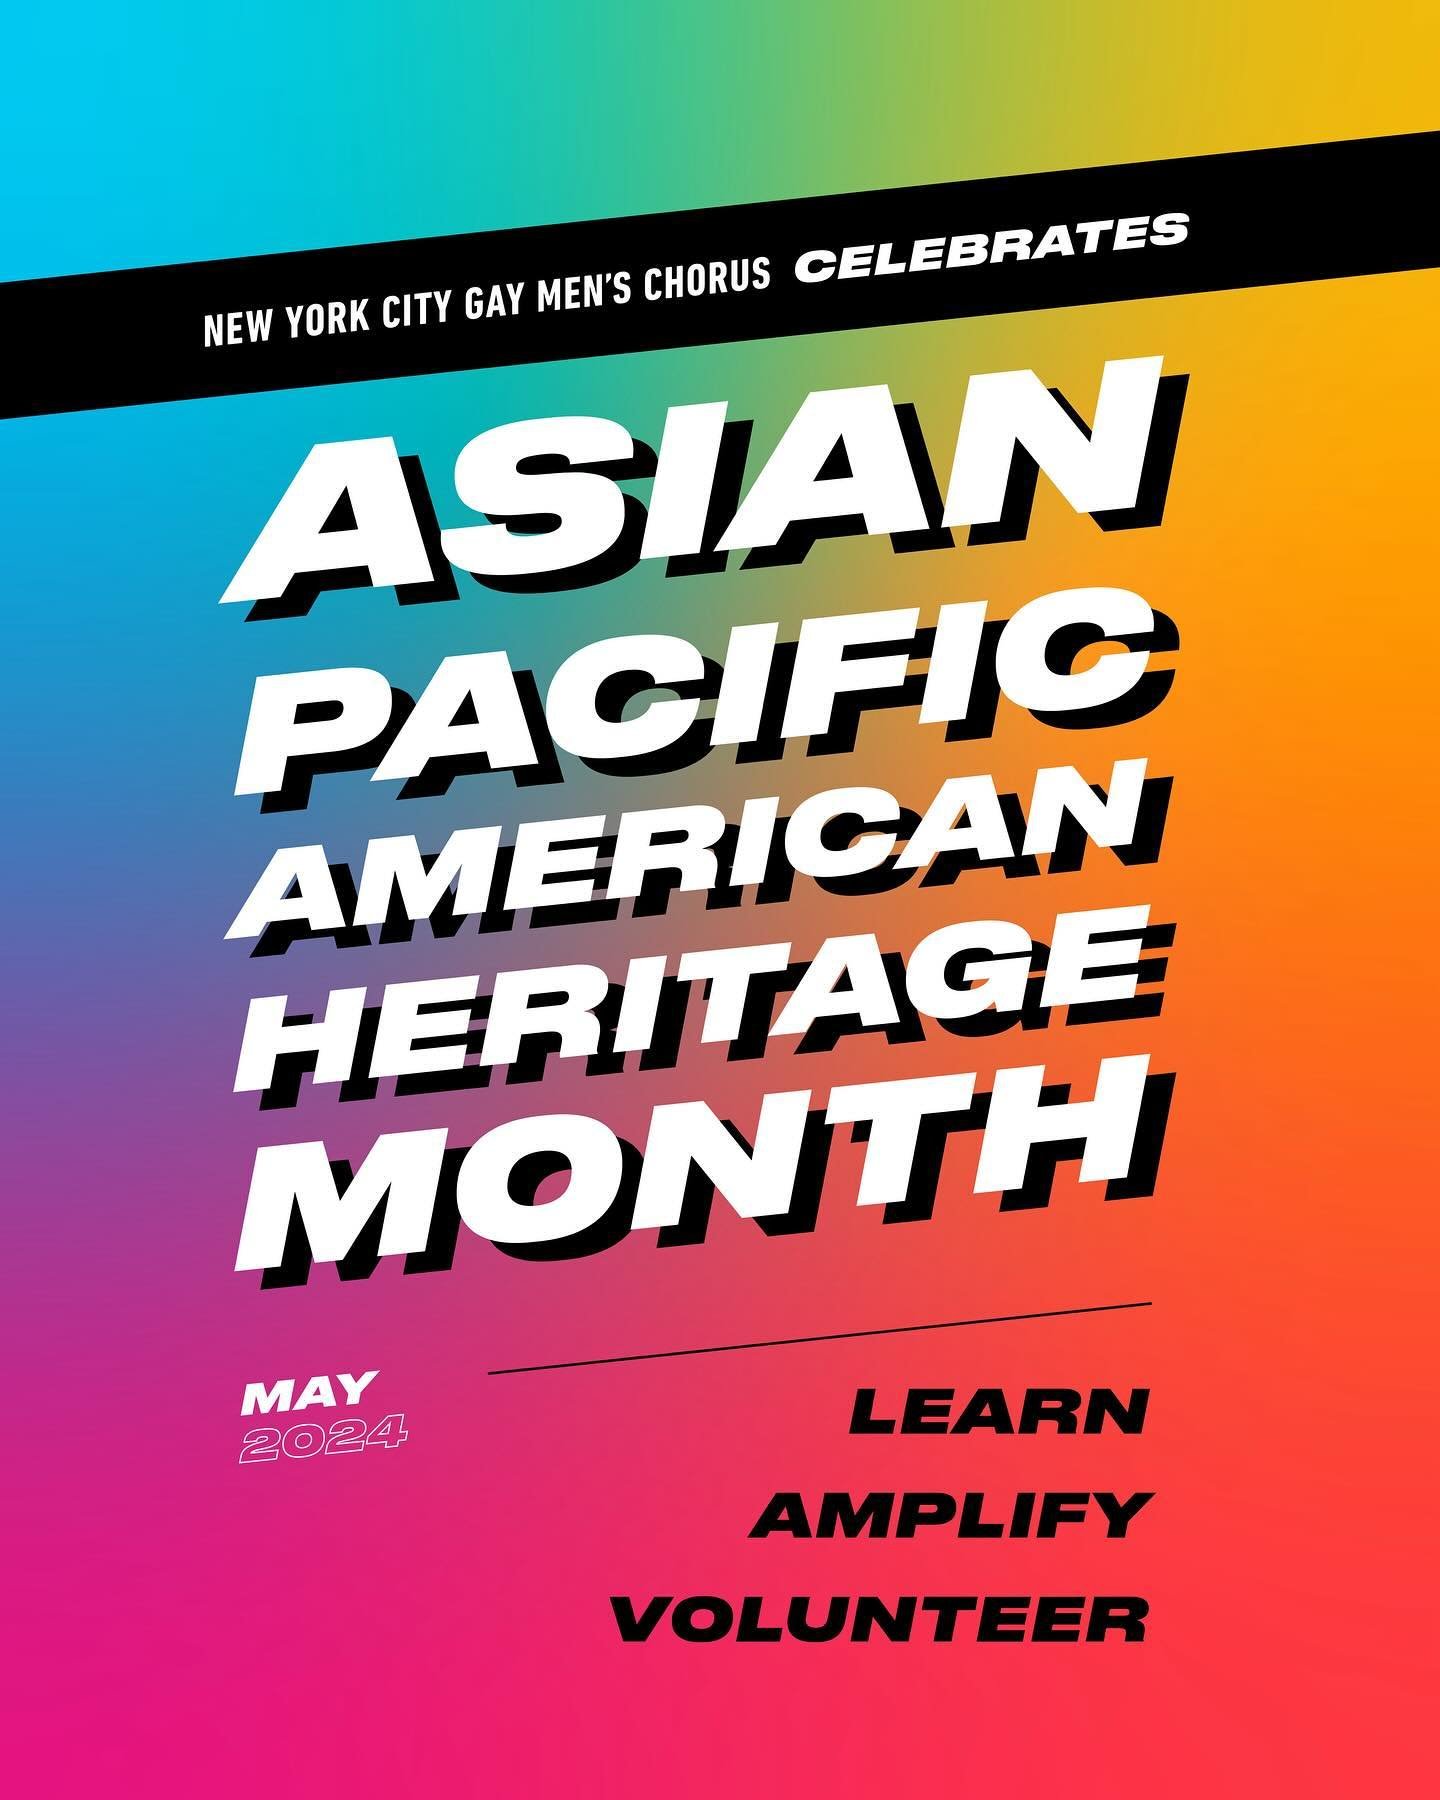 May marks Asian Pacific American Heritage Month. We celebrate by continuing to learn, amplify, and volunteer among our queer community in New York City and beyond.

🗣️Check out the accounts tagged to learn more about the work they do in NYC, serving